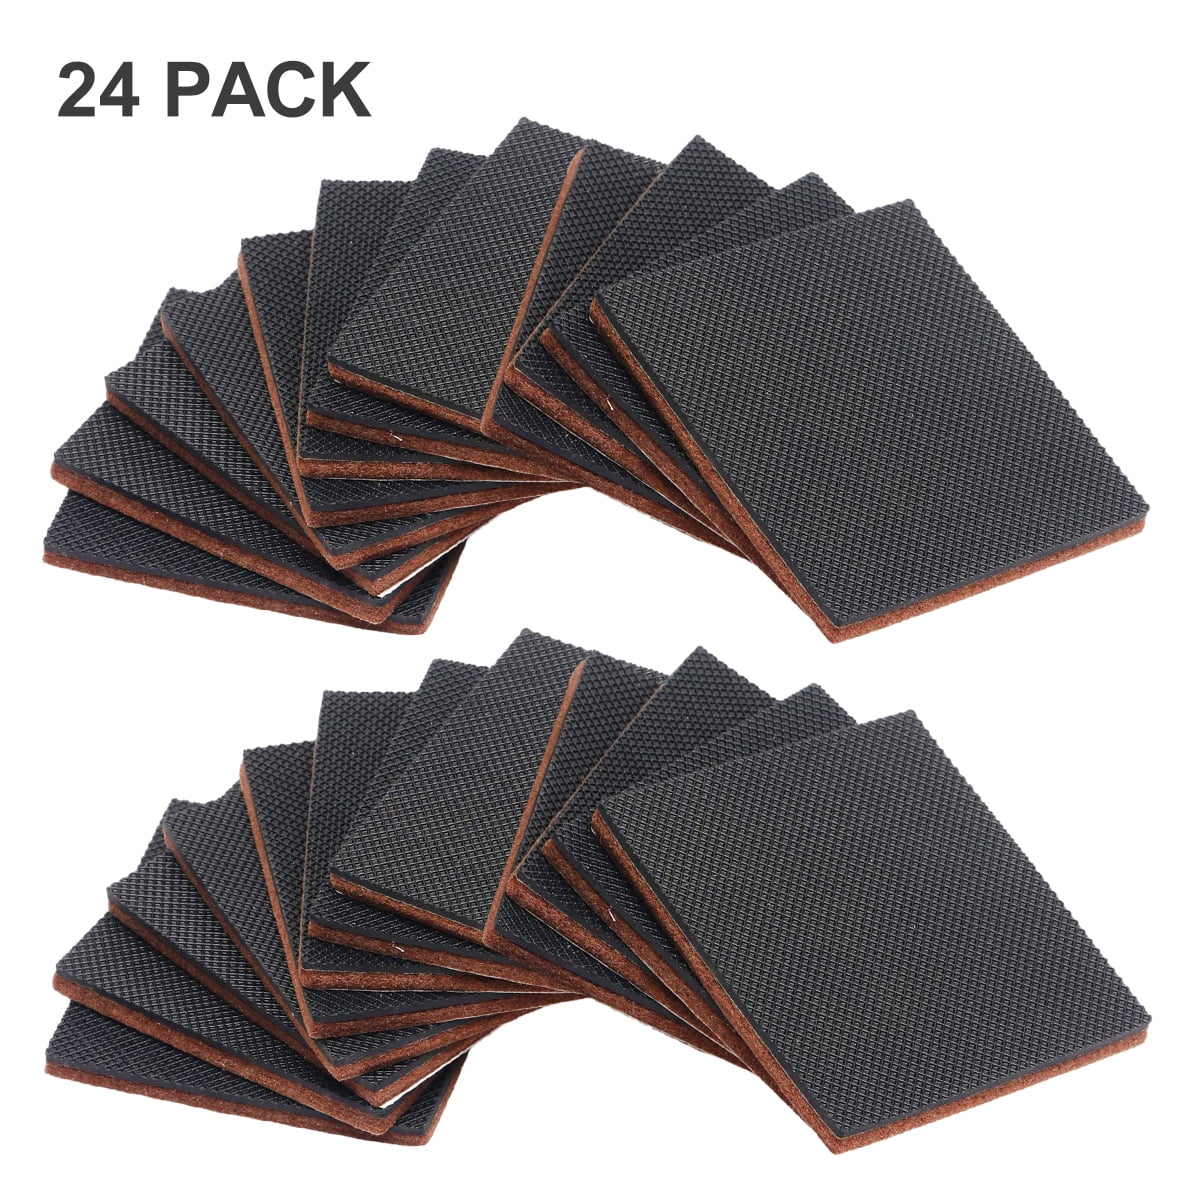 PLAFOPE 50 Pairs Bed Sheet Stickers Rug Corner Grippers Rug Pads Couch Pads  for Sofa Furniture Pads Gripper Area Furniture Grippers Floor Mat Non-Skid